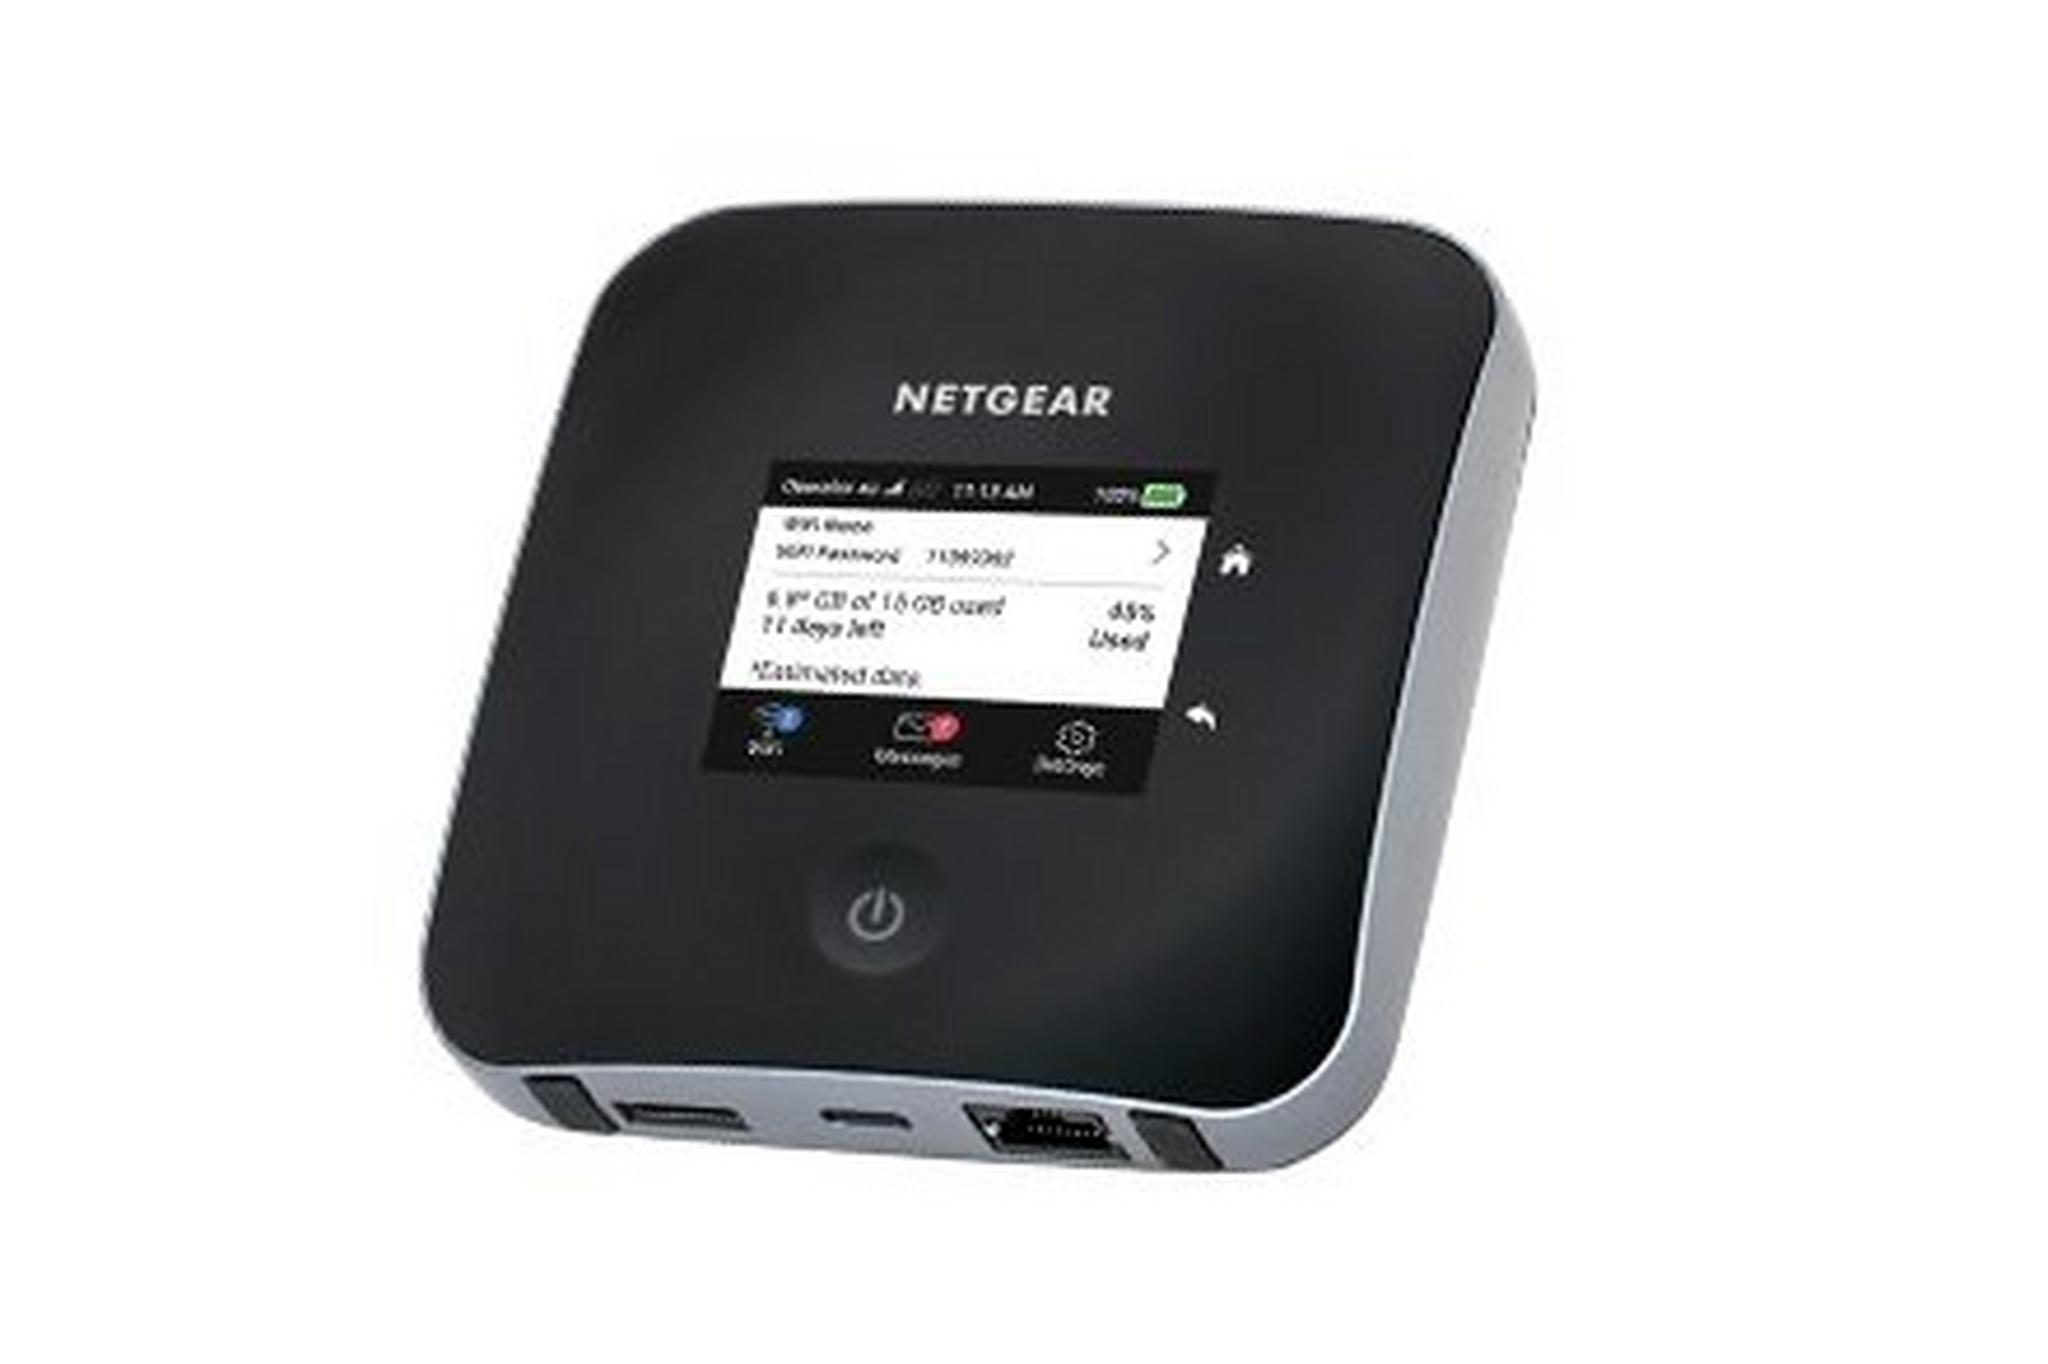 Nighthawk M2 Mobile Router (MR2100)